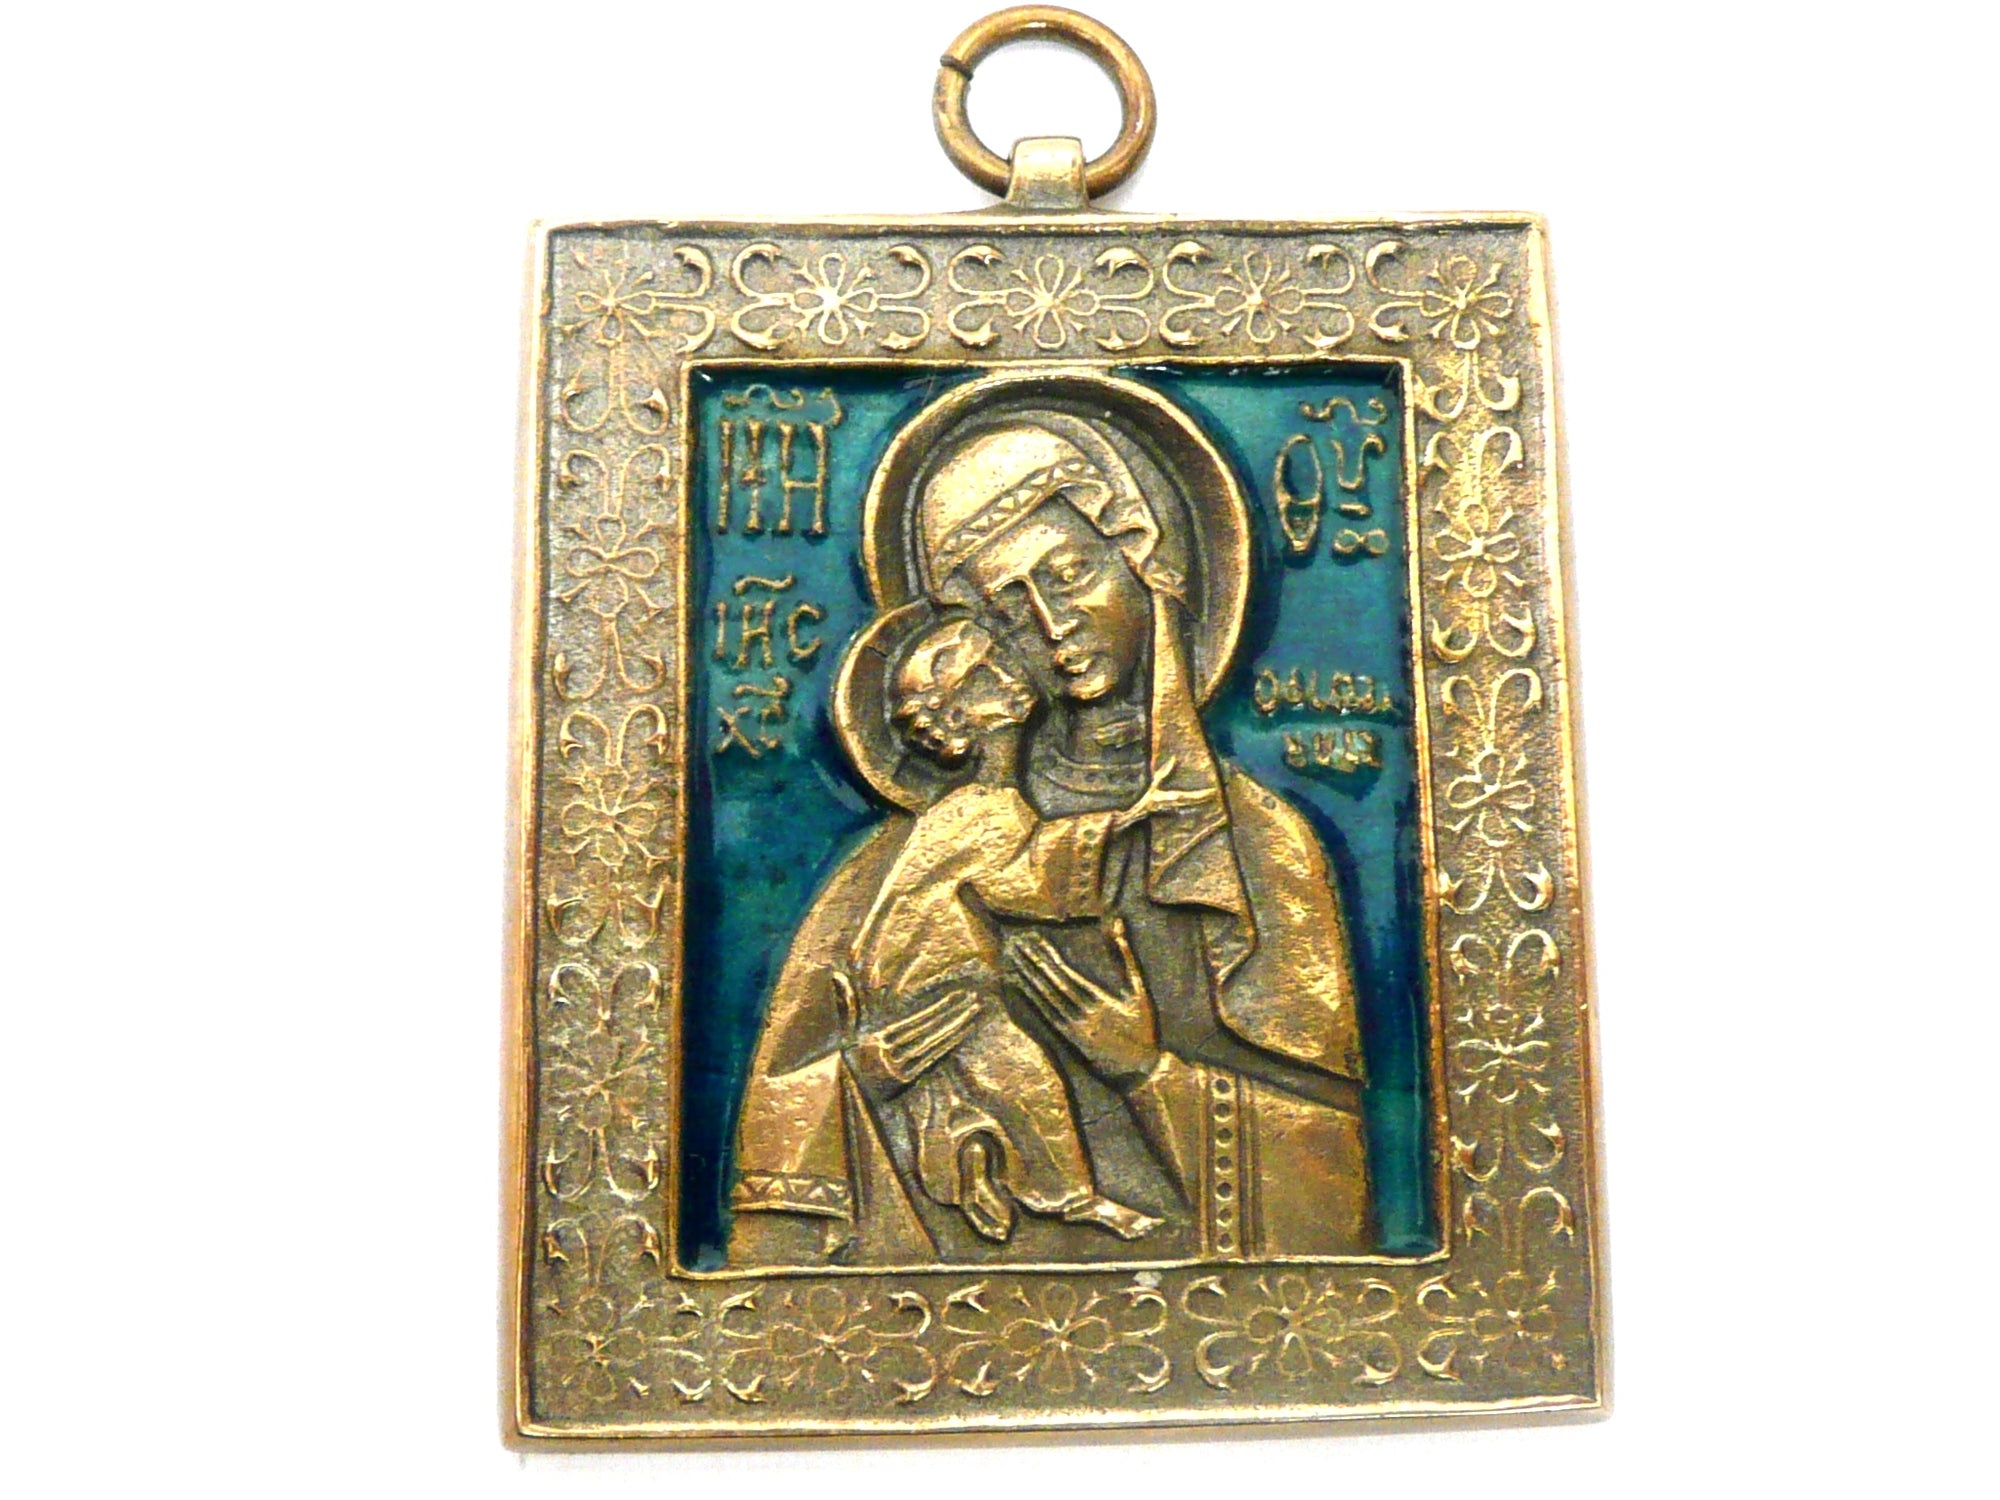 Vintage Brass and Enamel Orthodox Wall Plaque of Jesus and Mary